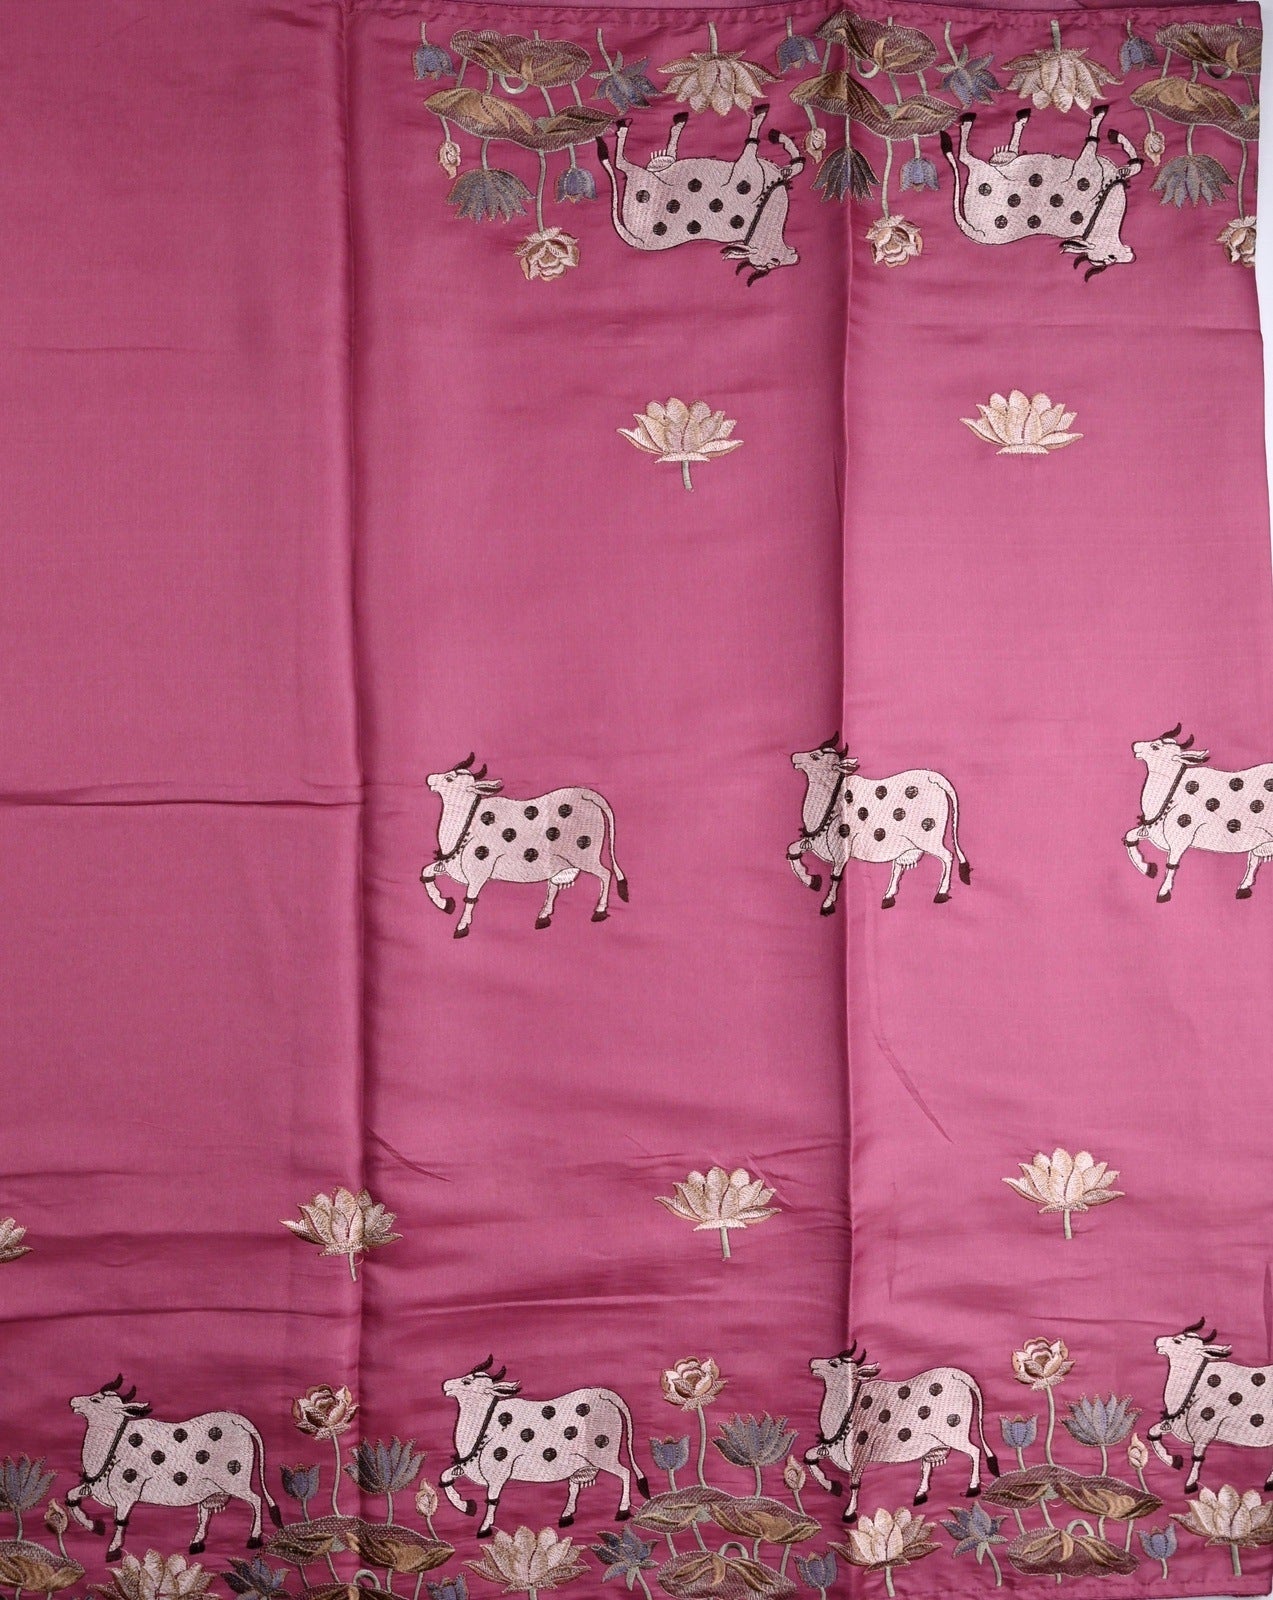 Tussar fancy saree pink color allover thread weaving with self pallu and attached plain blouse